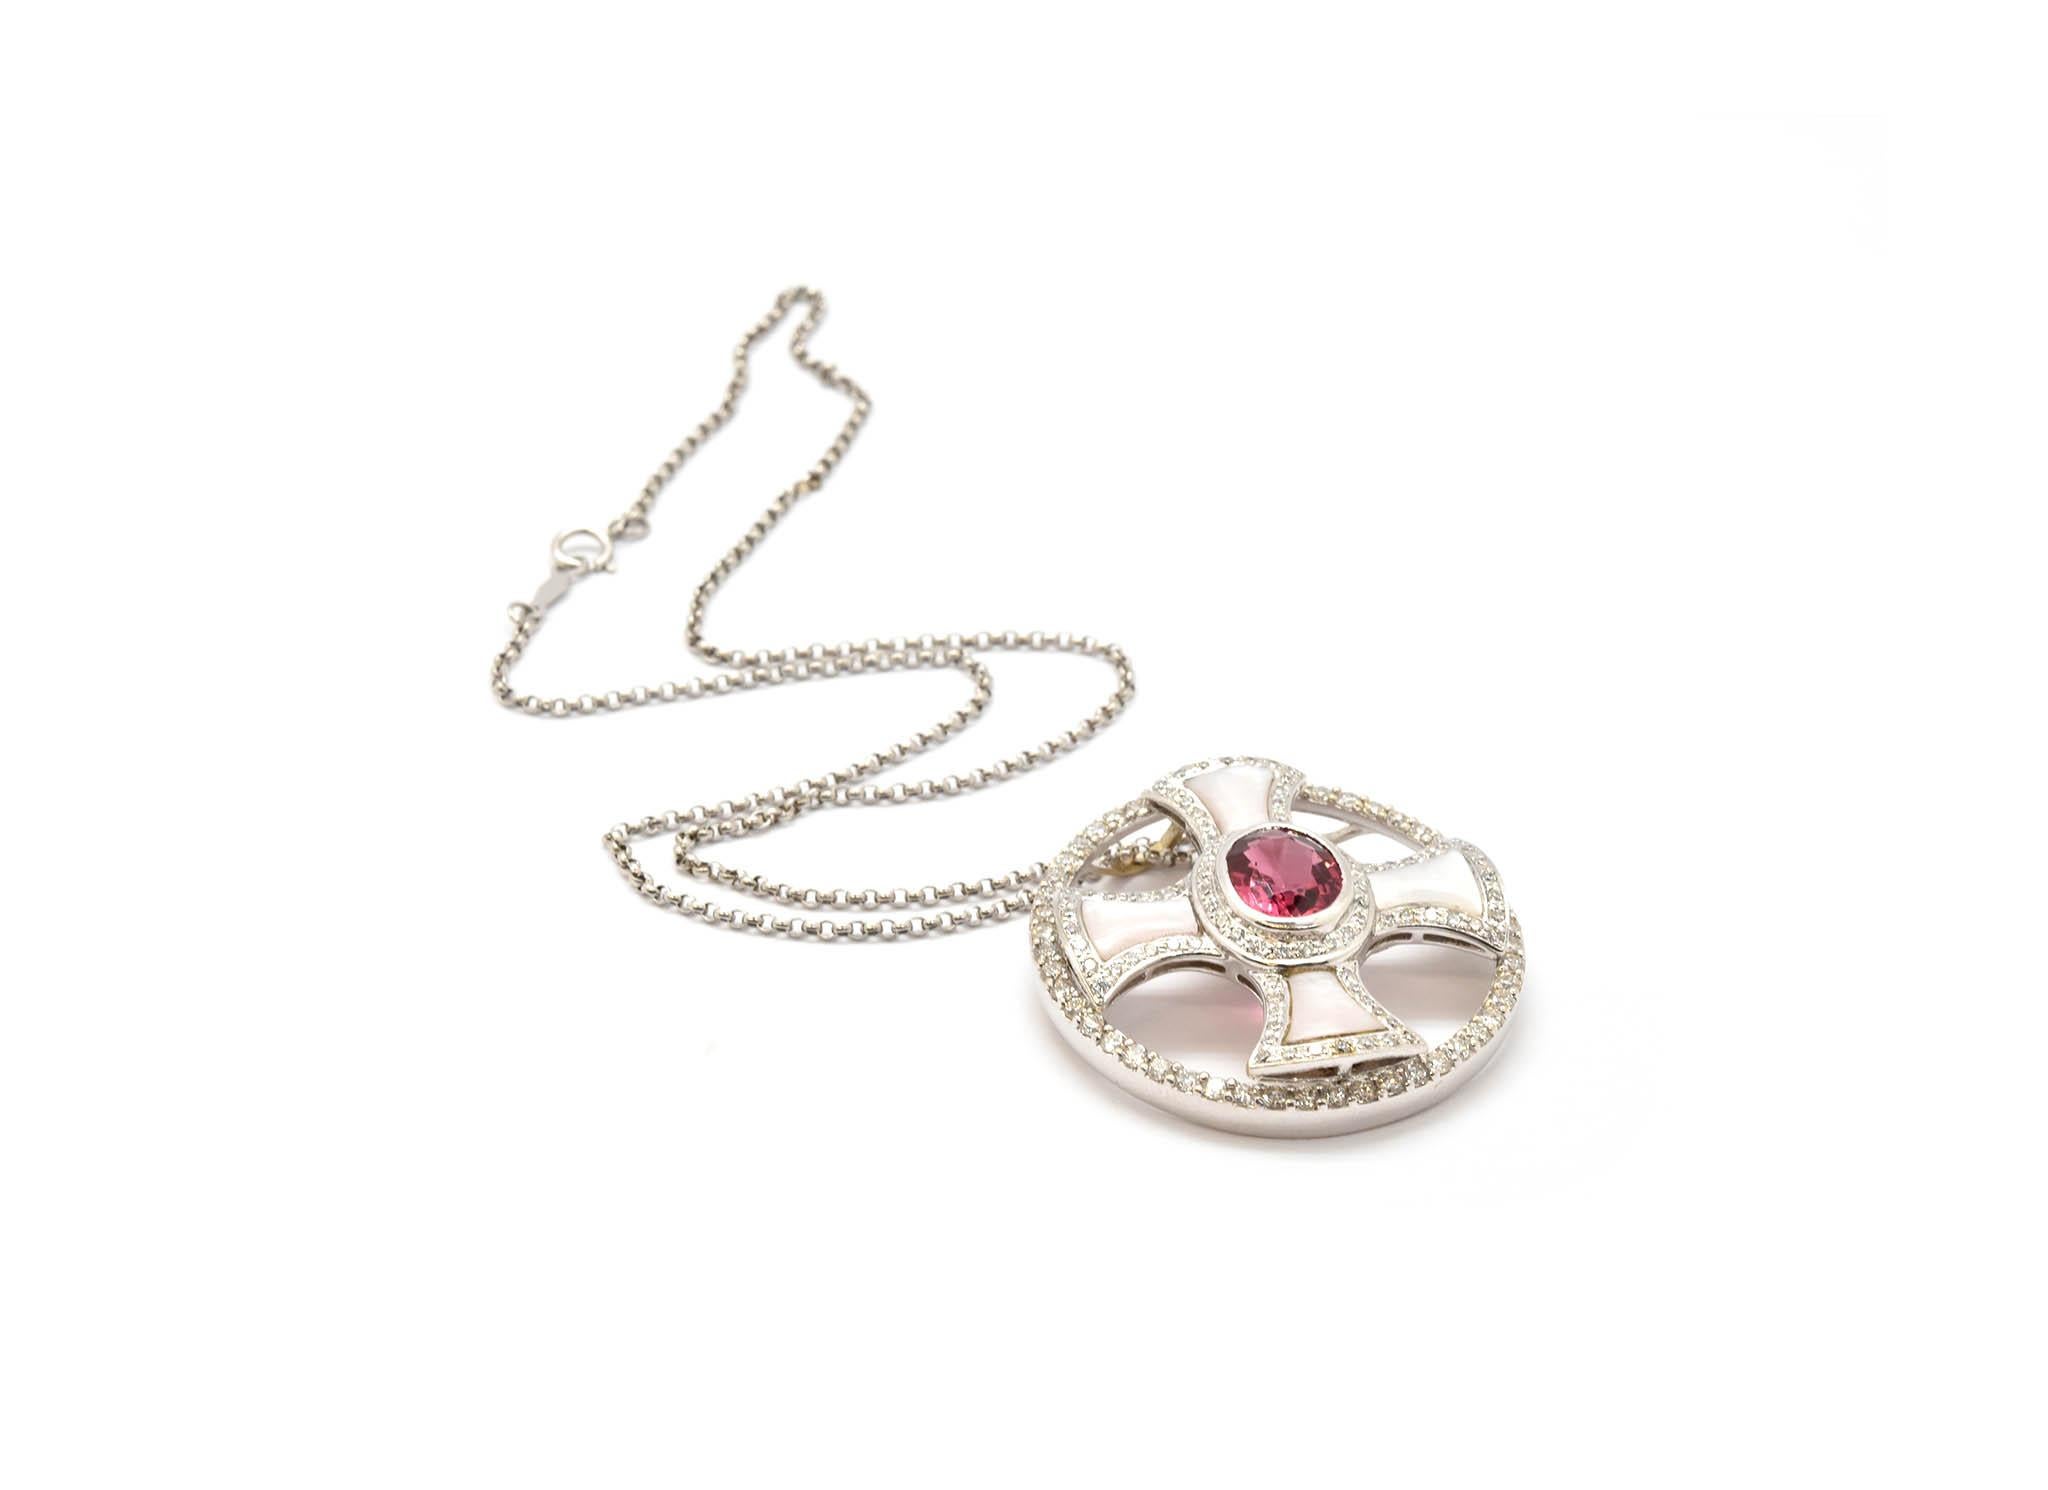 This necklace was custom made in 14k white gold. The pendant features a stunning oval-cut tourmaline that weighs approximately 1.75 carats. The tourmaline is accented by a bezel of diamonds that extends to the edges of the piece as well. The